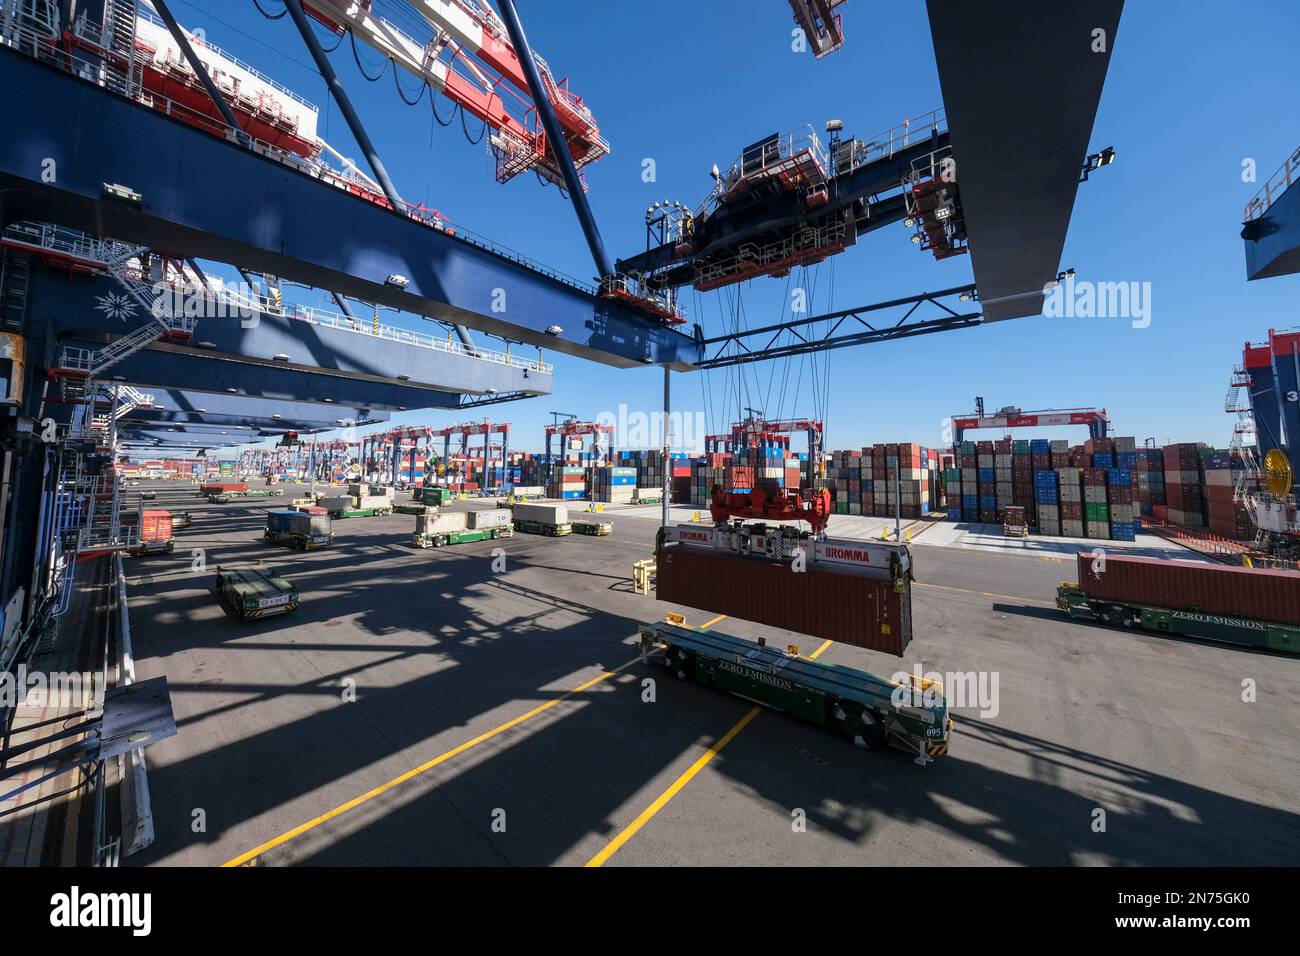 Los Angeles, California, USA. 9th Feb, 2023. Computer-controlled cargo cranes rapidly lift containers from ships to zero emission Automated Guide Vehicles at the Long Beach Container Terminal (LBCT) in the Port of Long Beach on Thursday, Feb. 9, 2023 in Long Beach, California, U.S. The LBCT $2.5 billion investment that has enabled one of the world's top port terminal operators to significantly reduce emissions and have 'net zero'' within its grasp. This tour will also reveal for the first time more details of a $30 million project at LBCT to deploy zero-emission cargo handlin Stock Photo